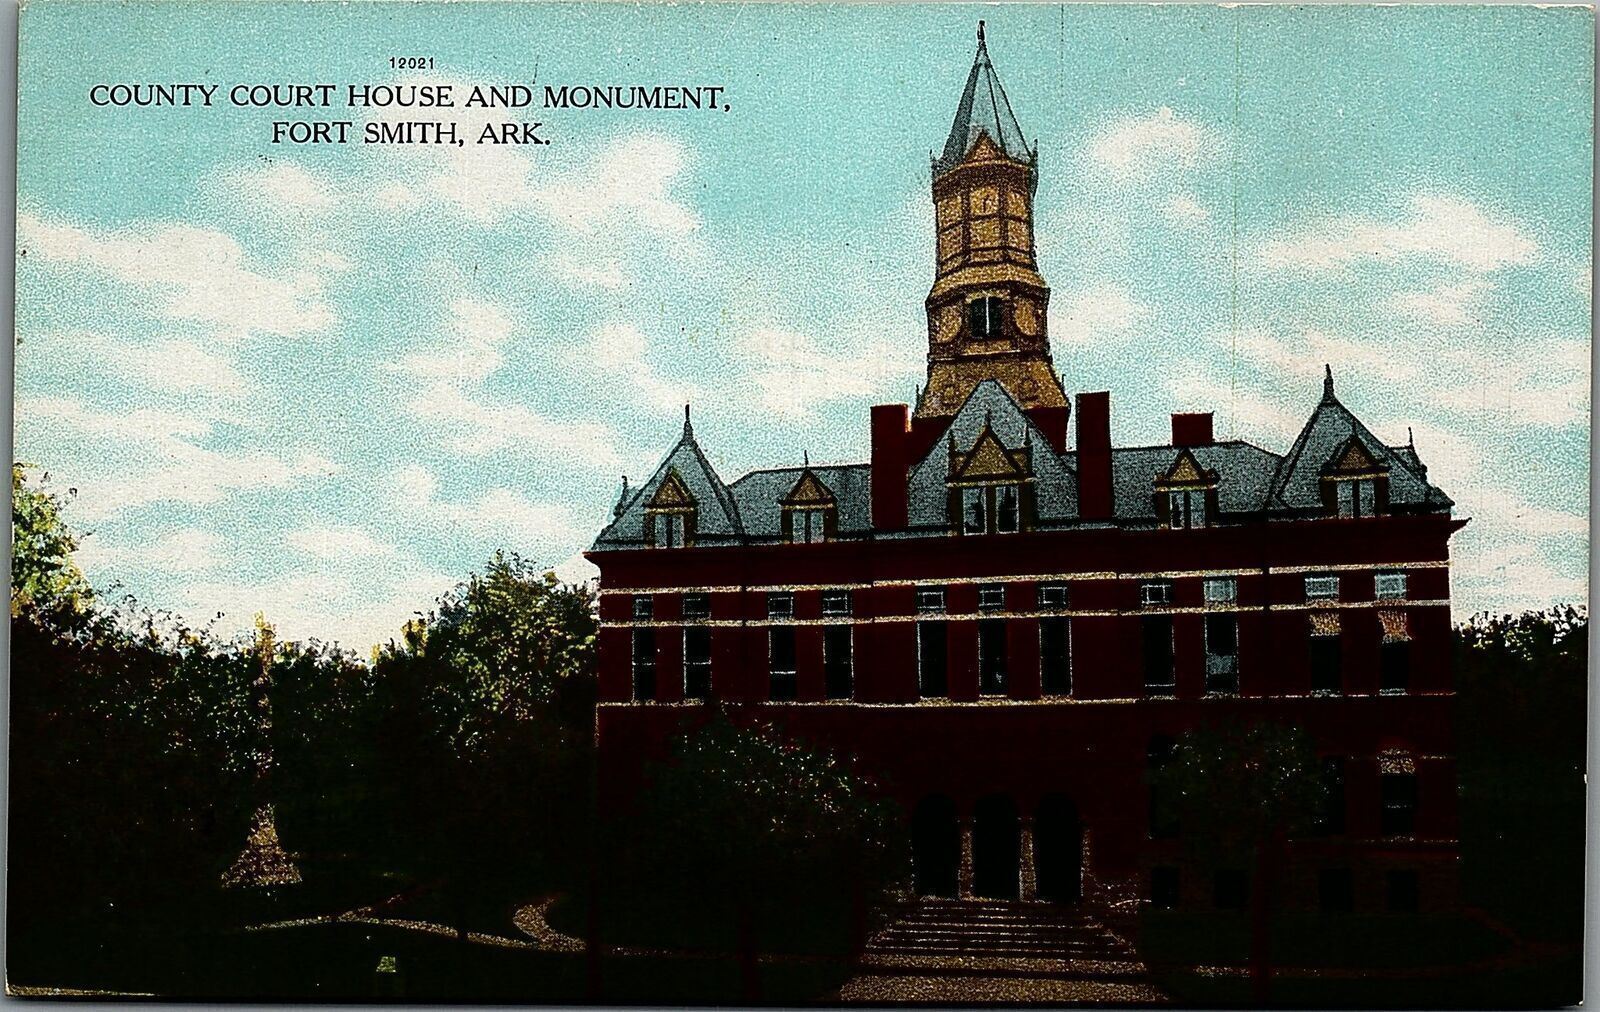 c1909 FORT SMITH ARKANSAS COUNTY COURT HOUSE AND MONUMENT POSTCARD 39-78